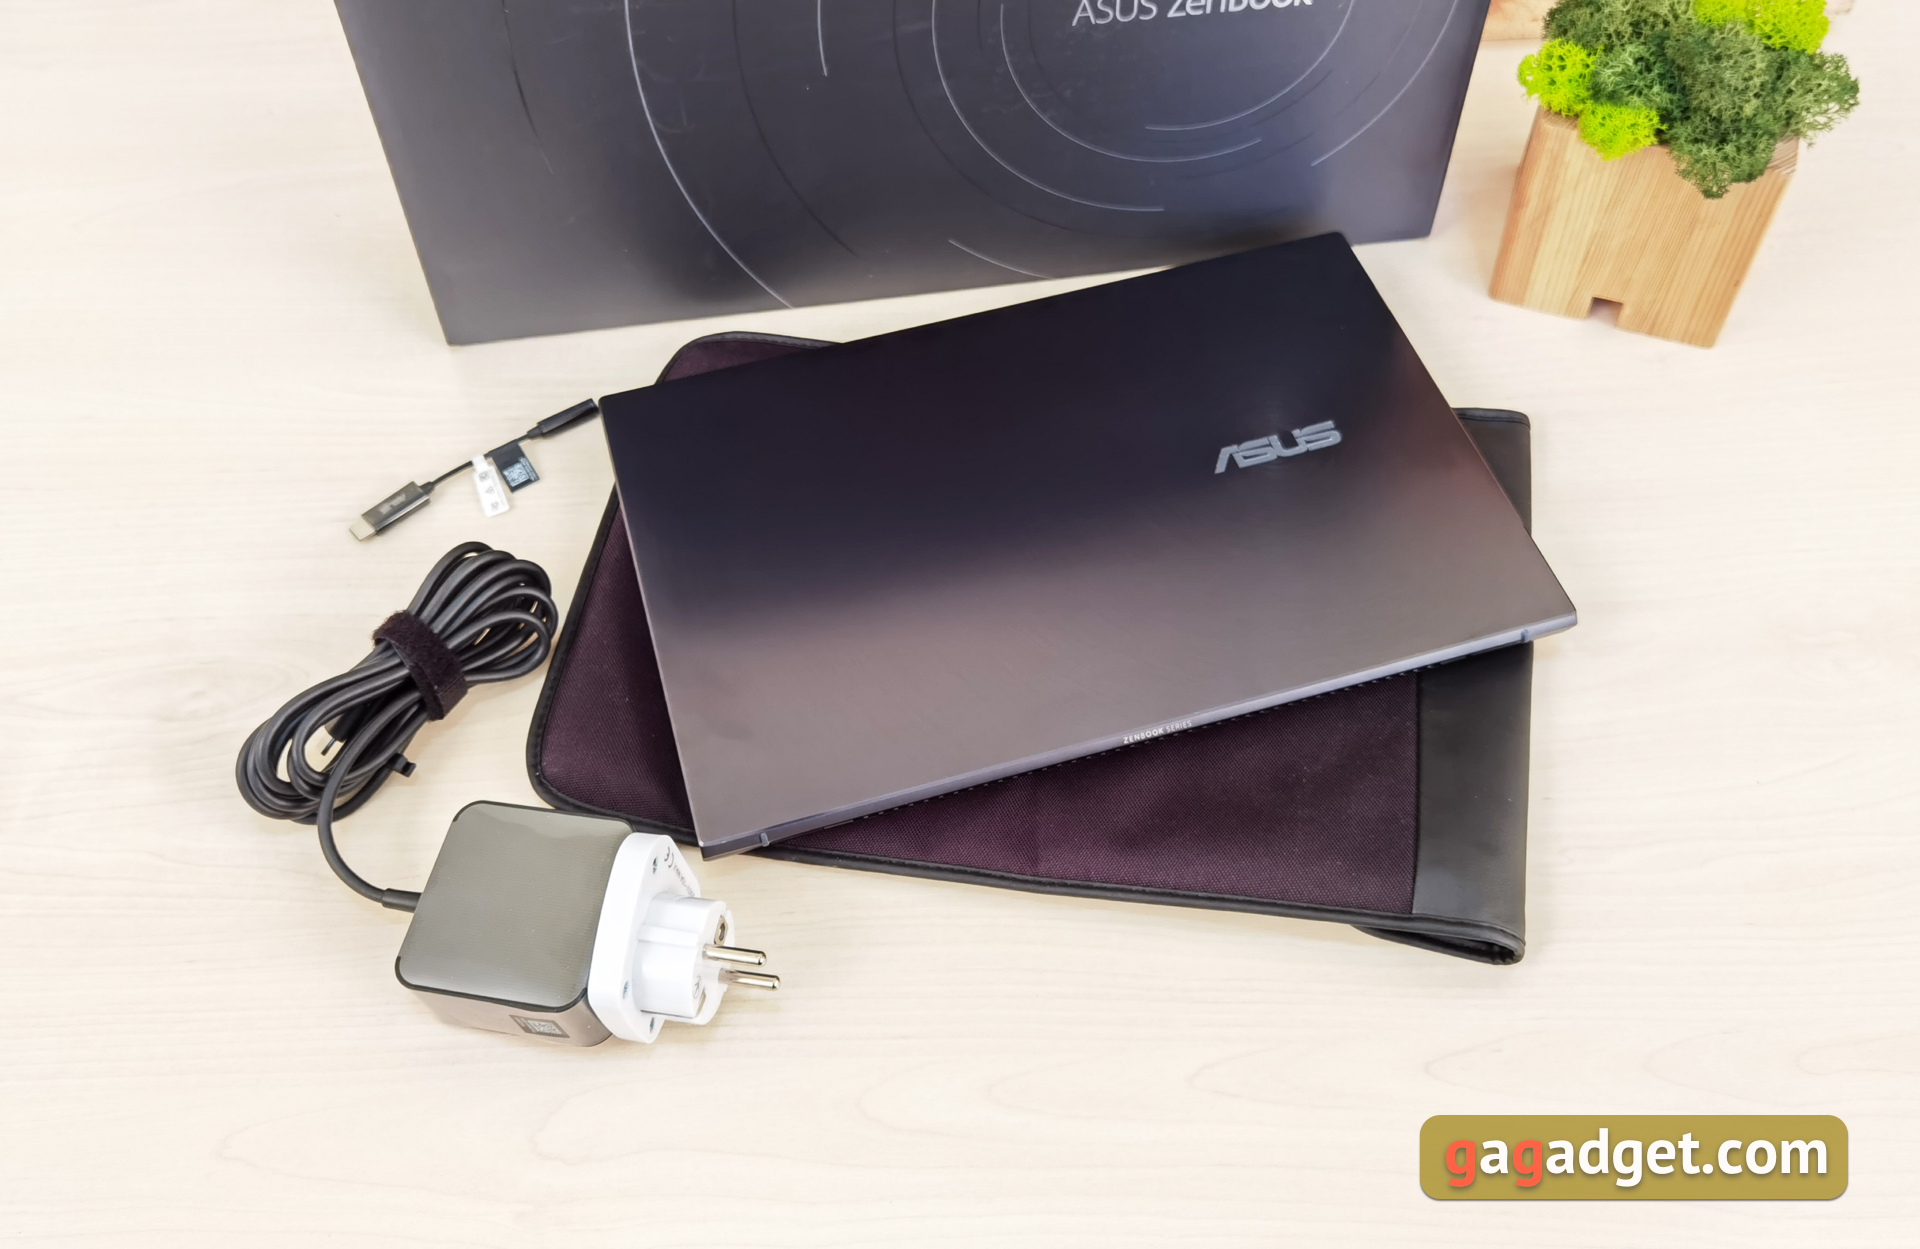 Asus ZenBook 13 review: This sweet-looking ultraportable has a surprise  inside - CNET